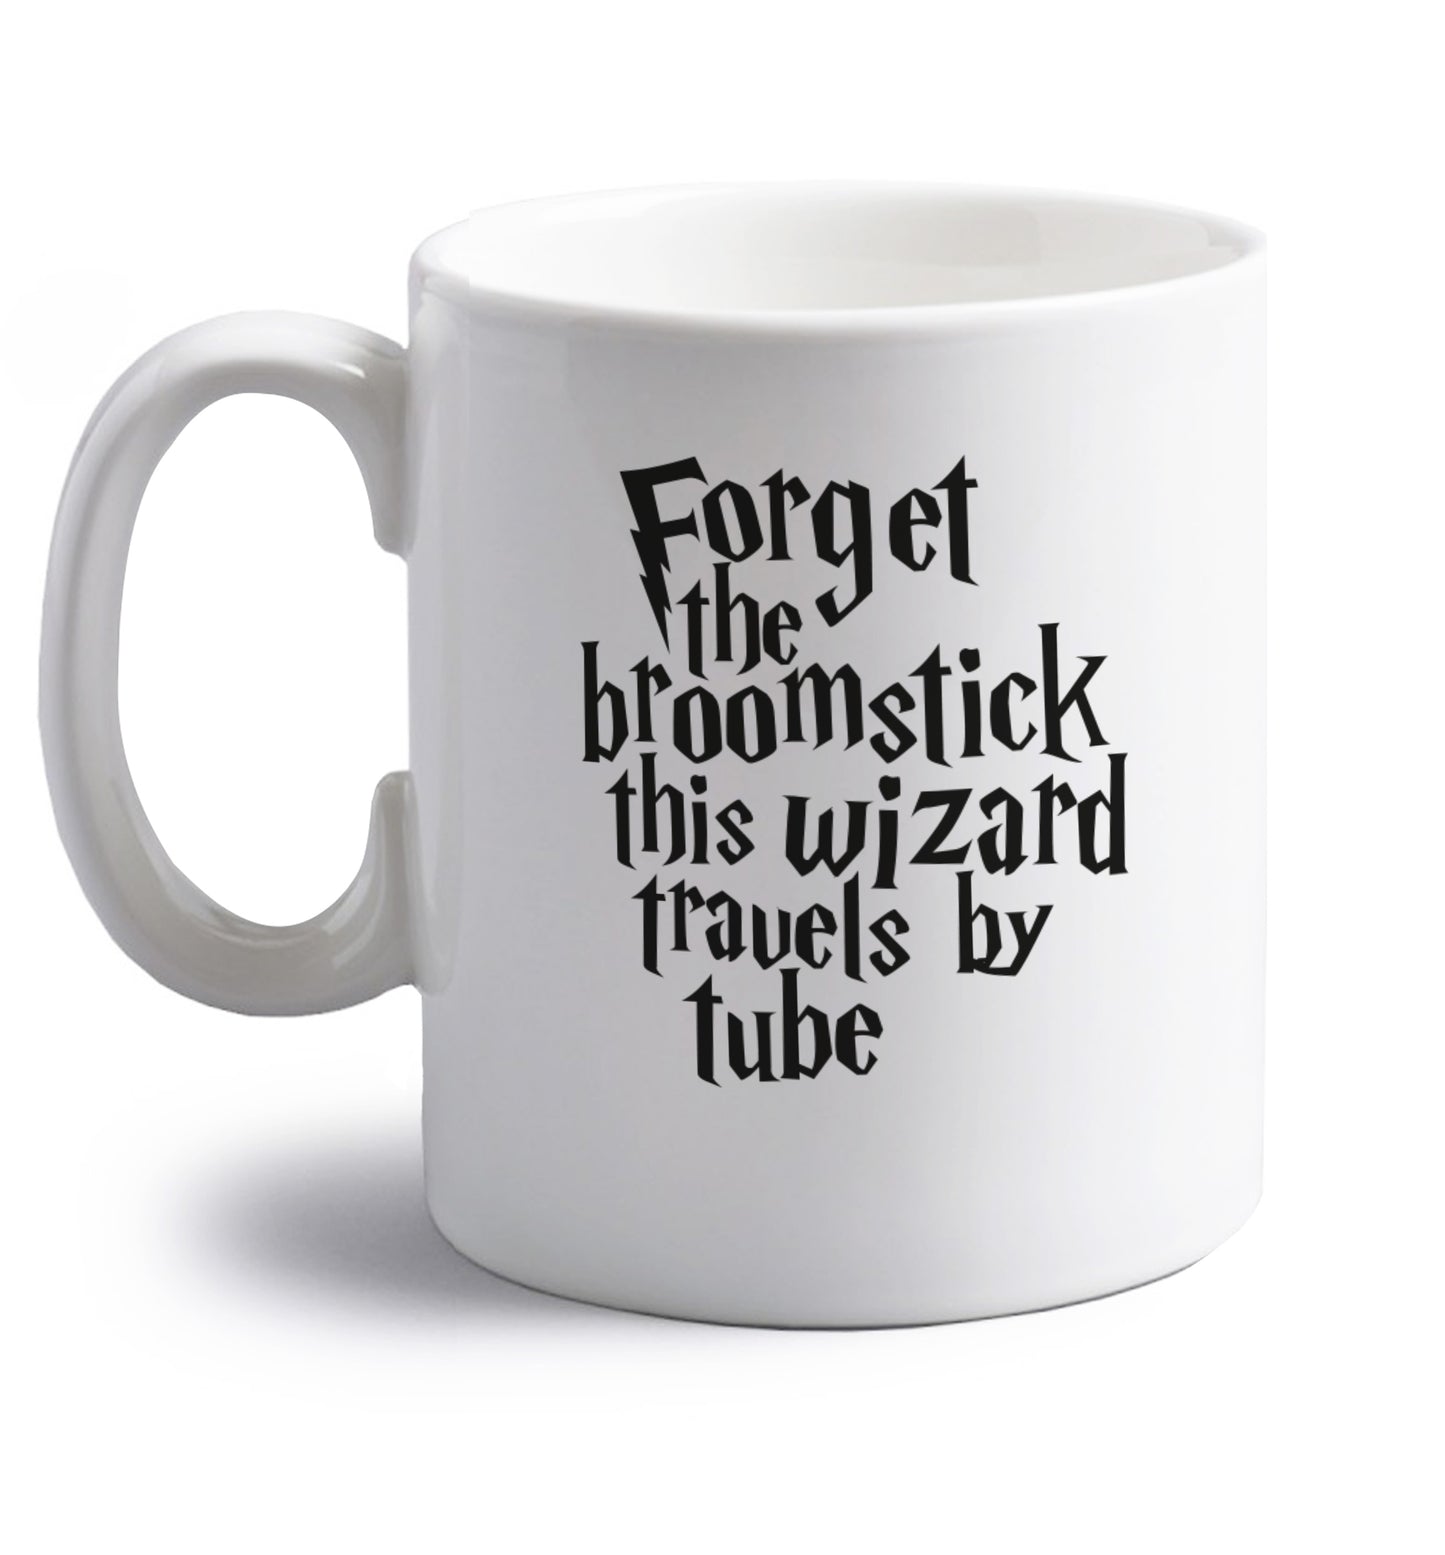 Forget the broomstick this wizard travels by tube right handed white ceramic mug 